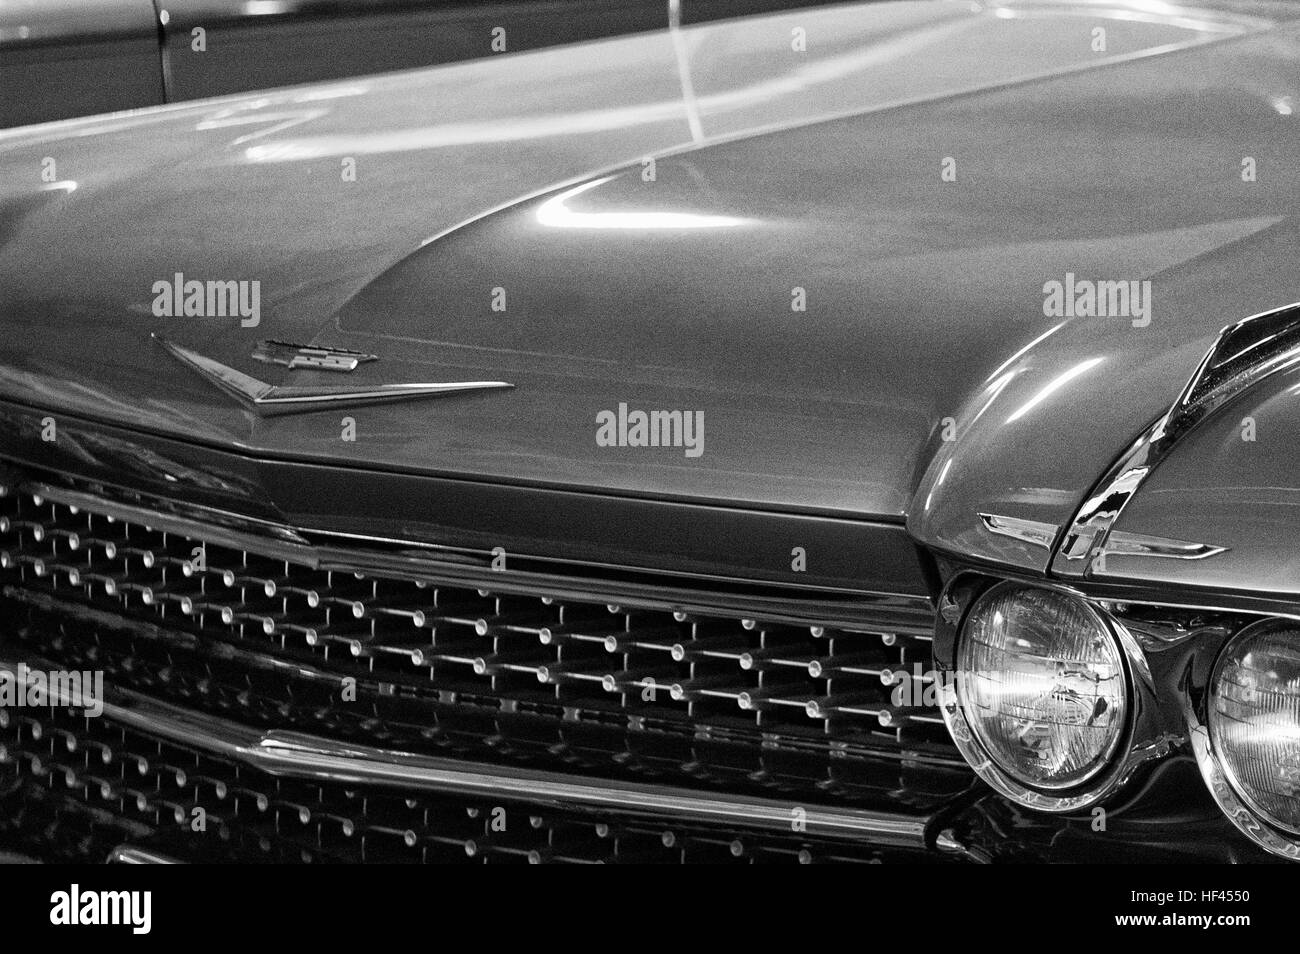 Photo Cadillac Coupe De Ville, Year 1959, 2-door  coupe, radiator grille, sign, symbol, emblem, Stock Photo